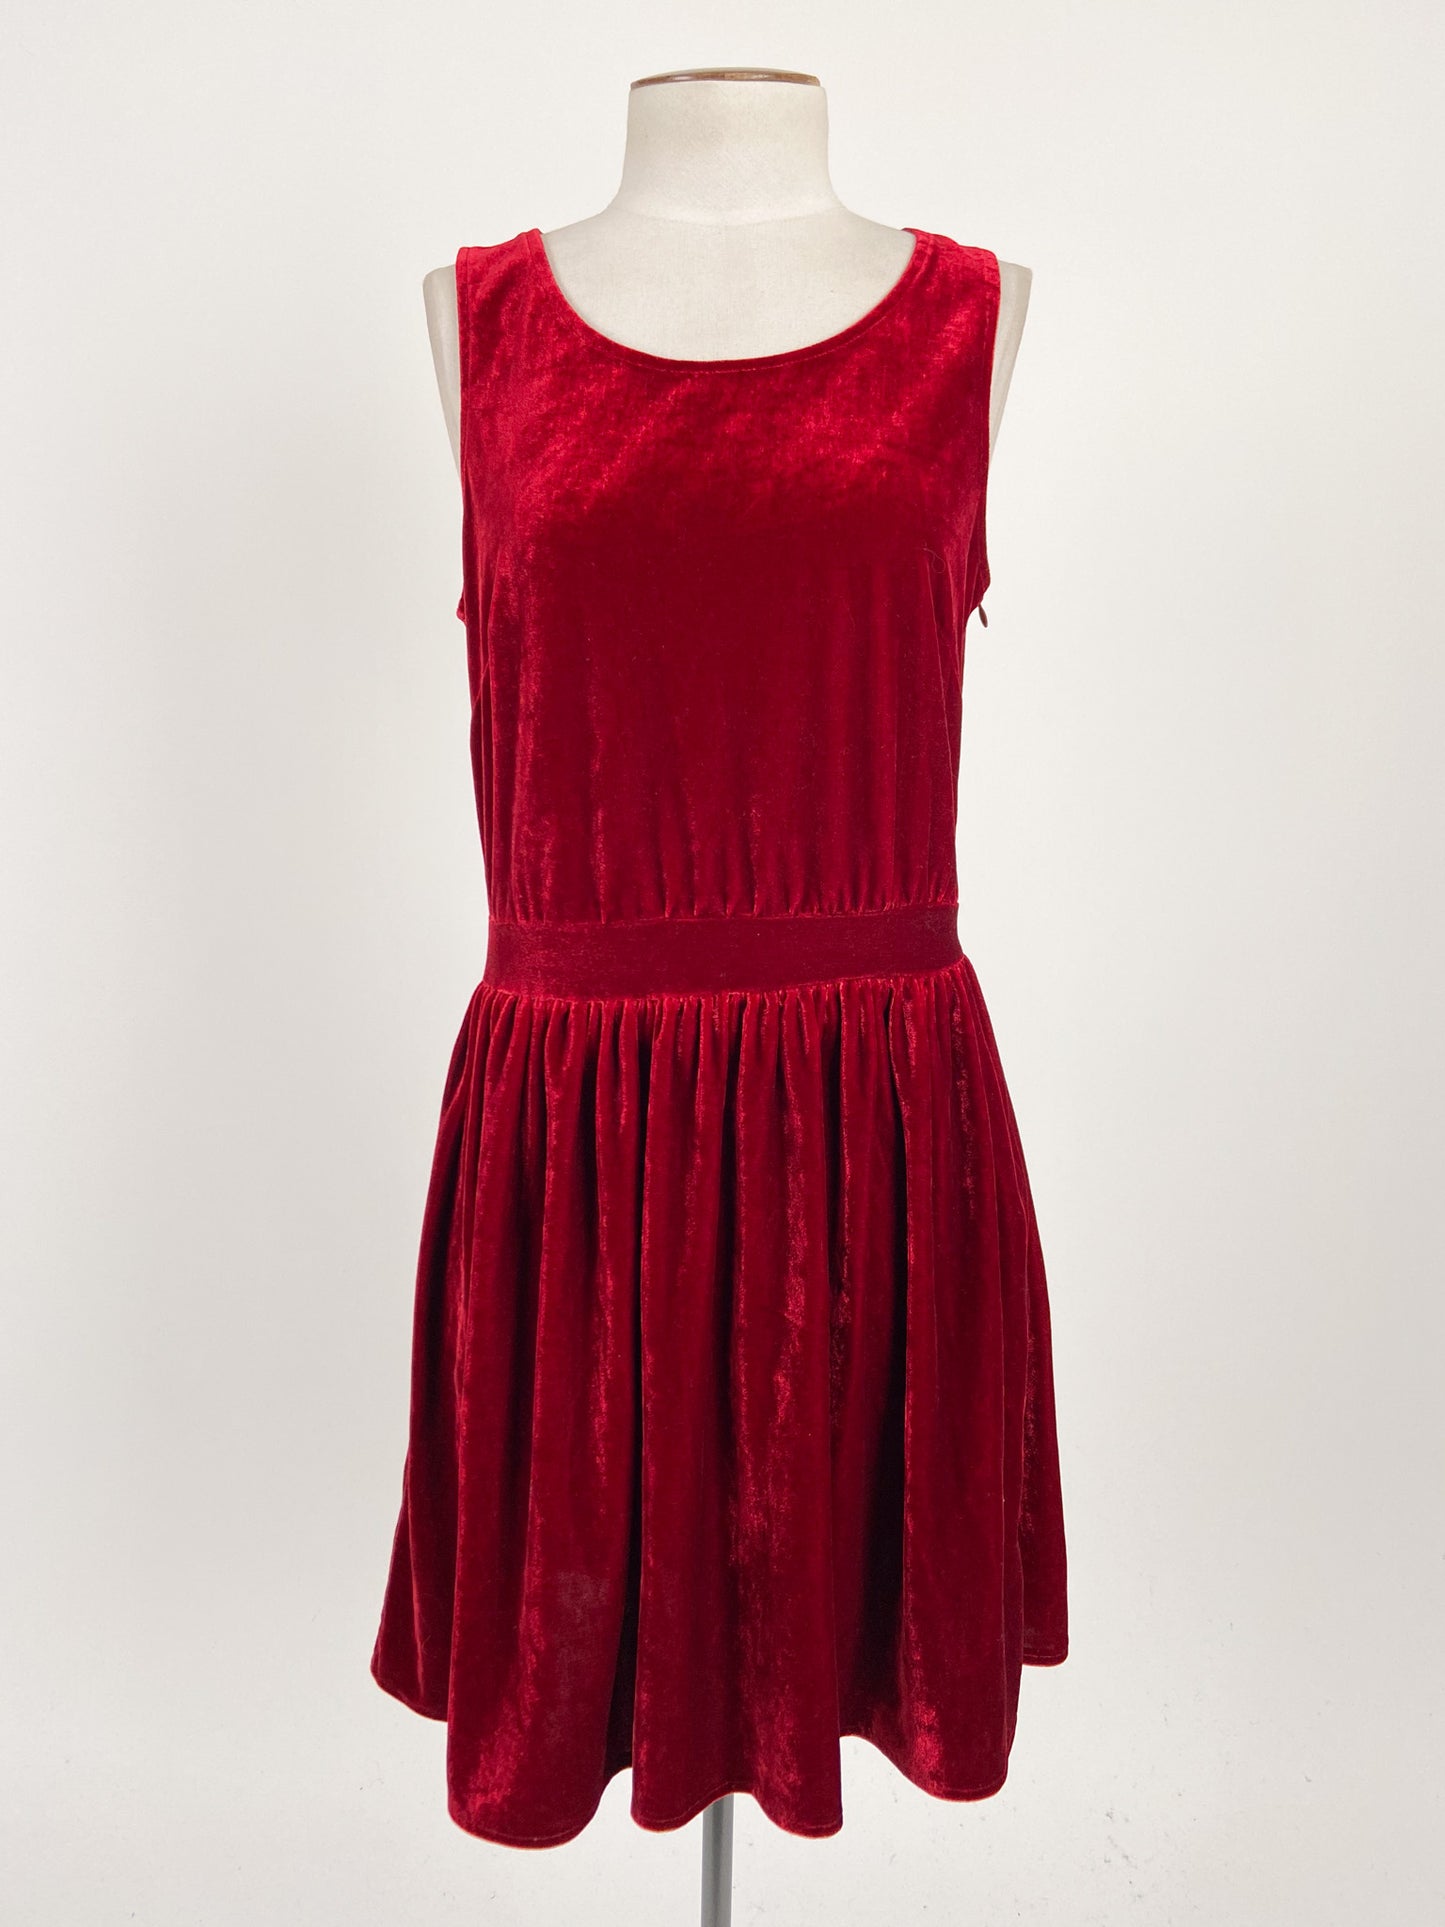 Glassons | Red Casual/Workwear Dress | Size 8